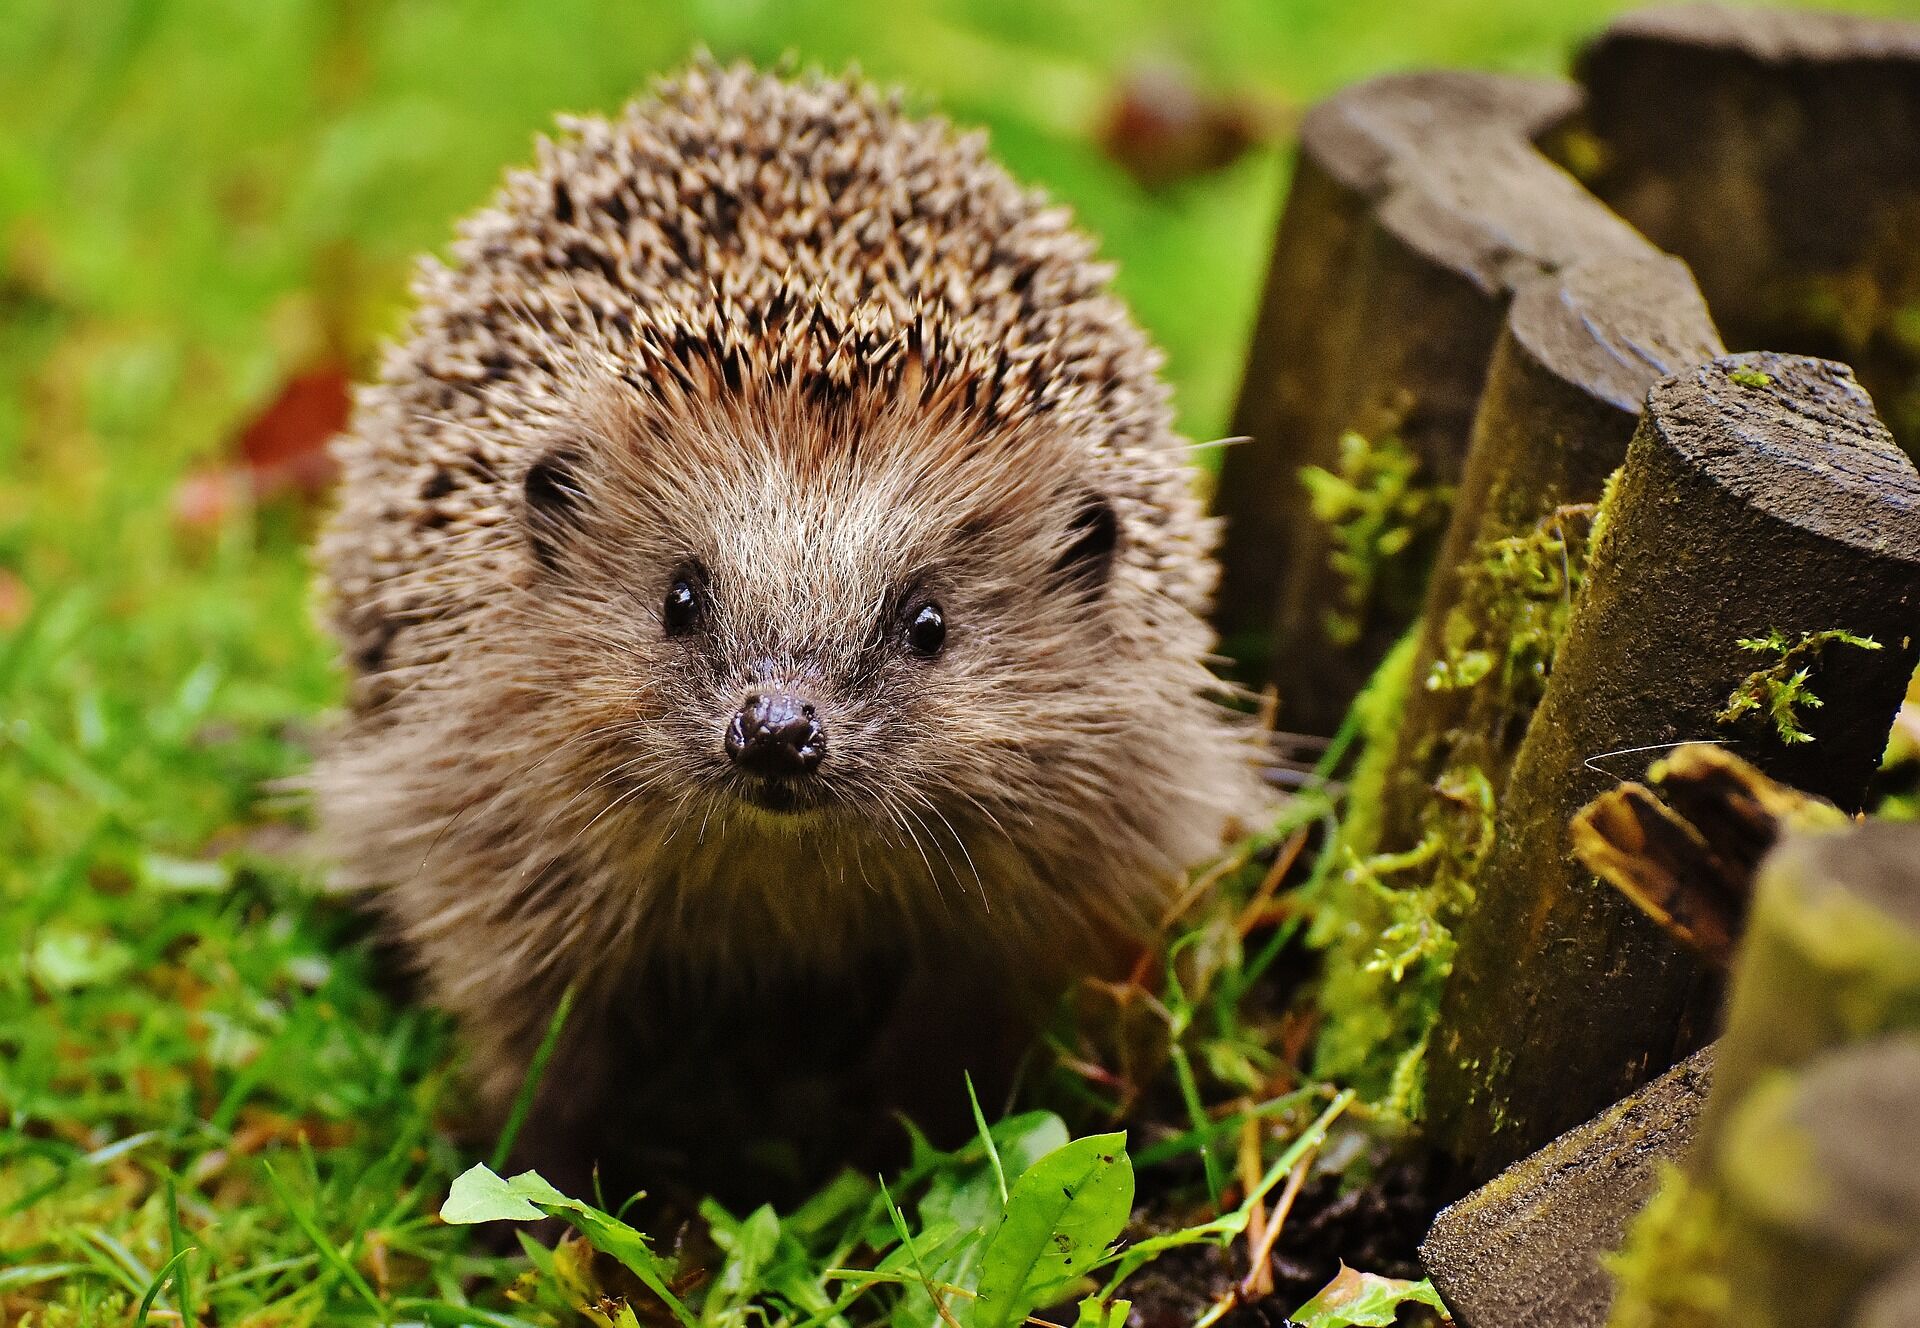 A little hedgehog looking up at the camera